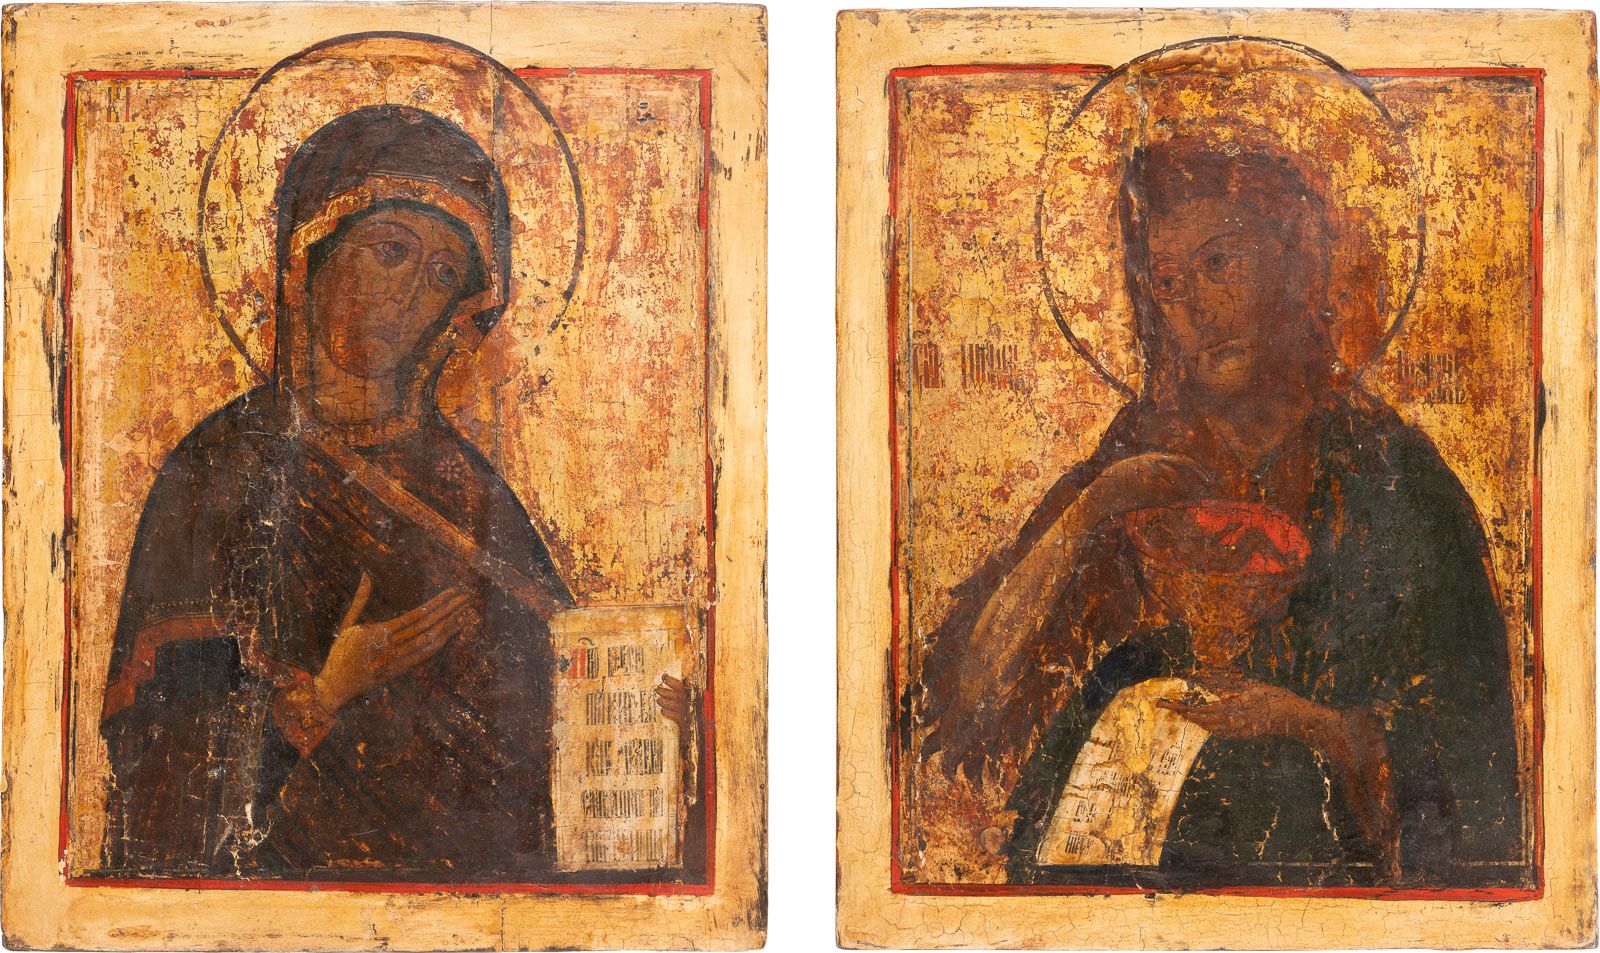 TWO LARGE ICONS SHOWING THE MOTHER OF GOD AND ST. JOHN THE DEUX GRANDES ICÔNES R&hellip;